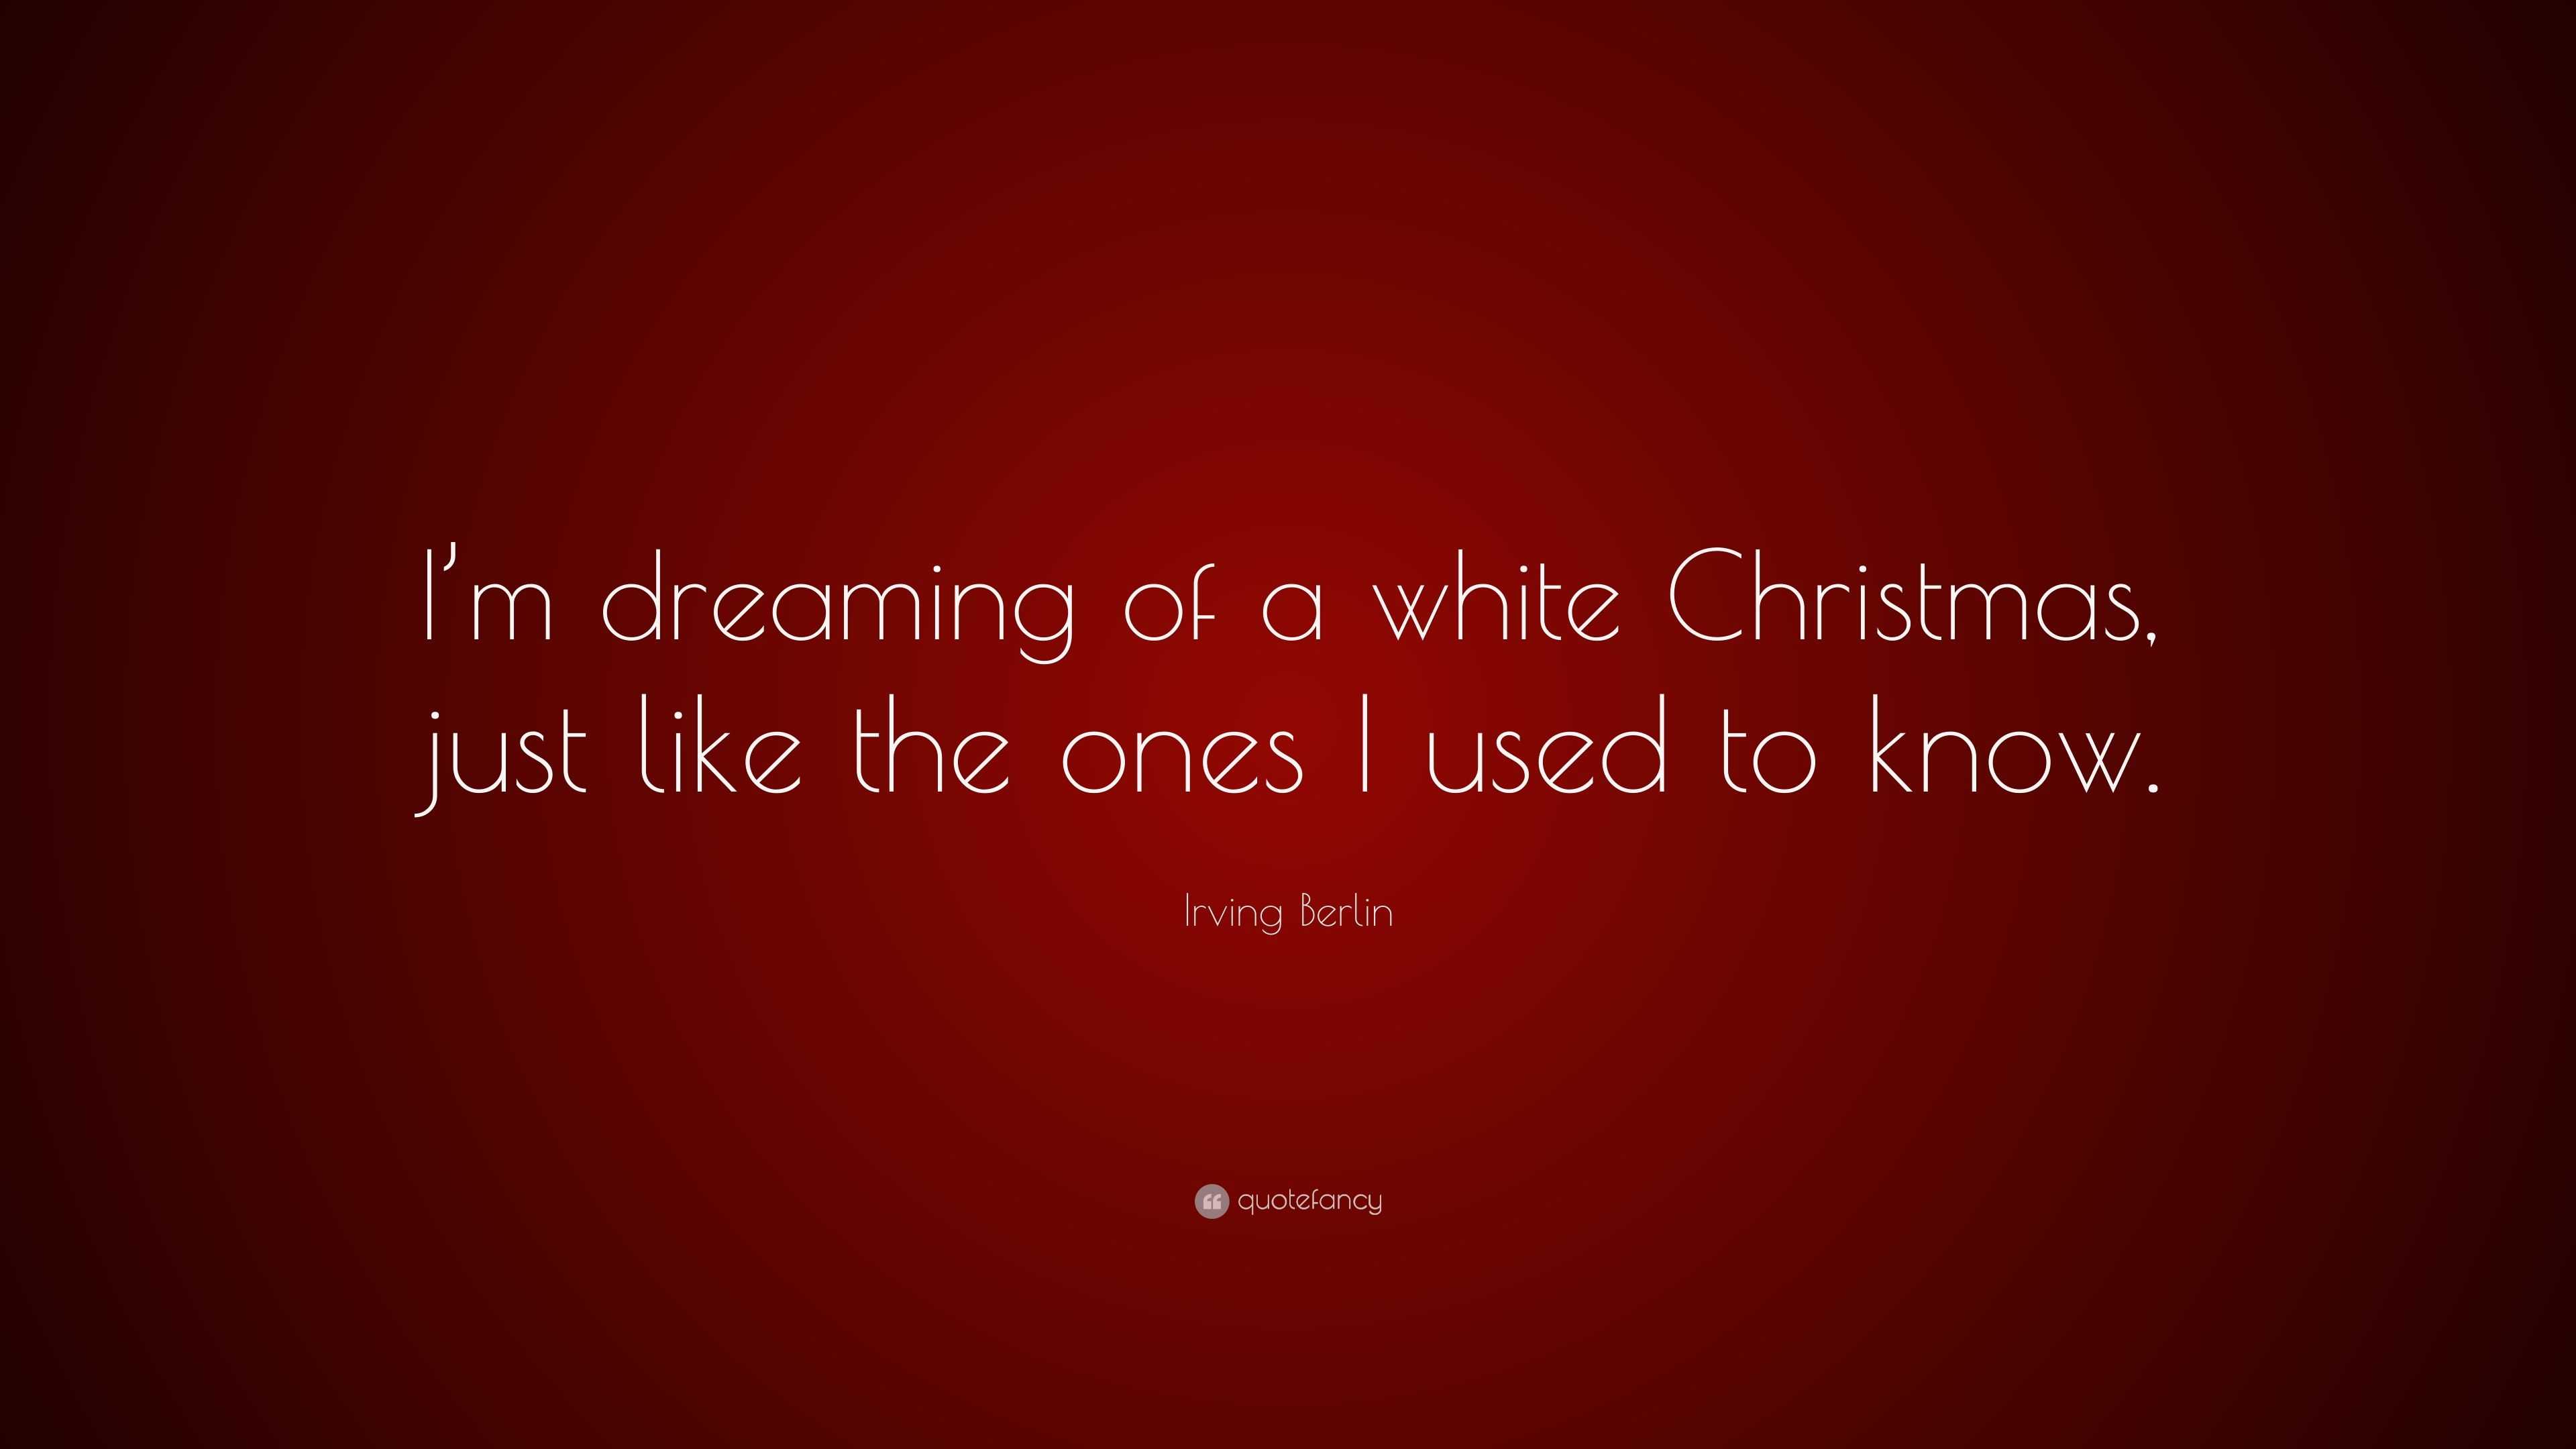 Irving Berlin Quote: “I’m dreaming of a white Christmas, just like the ...